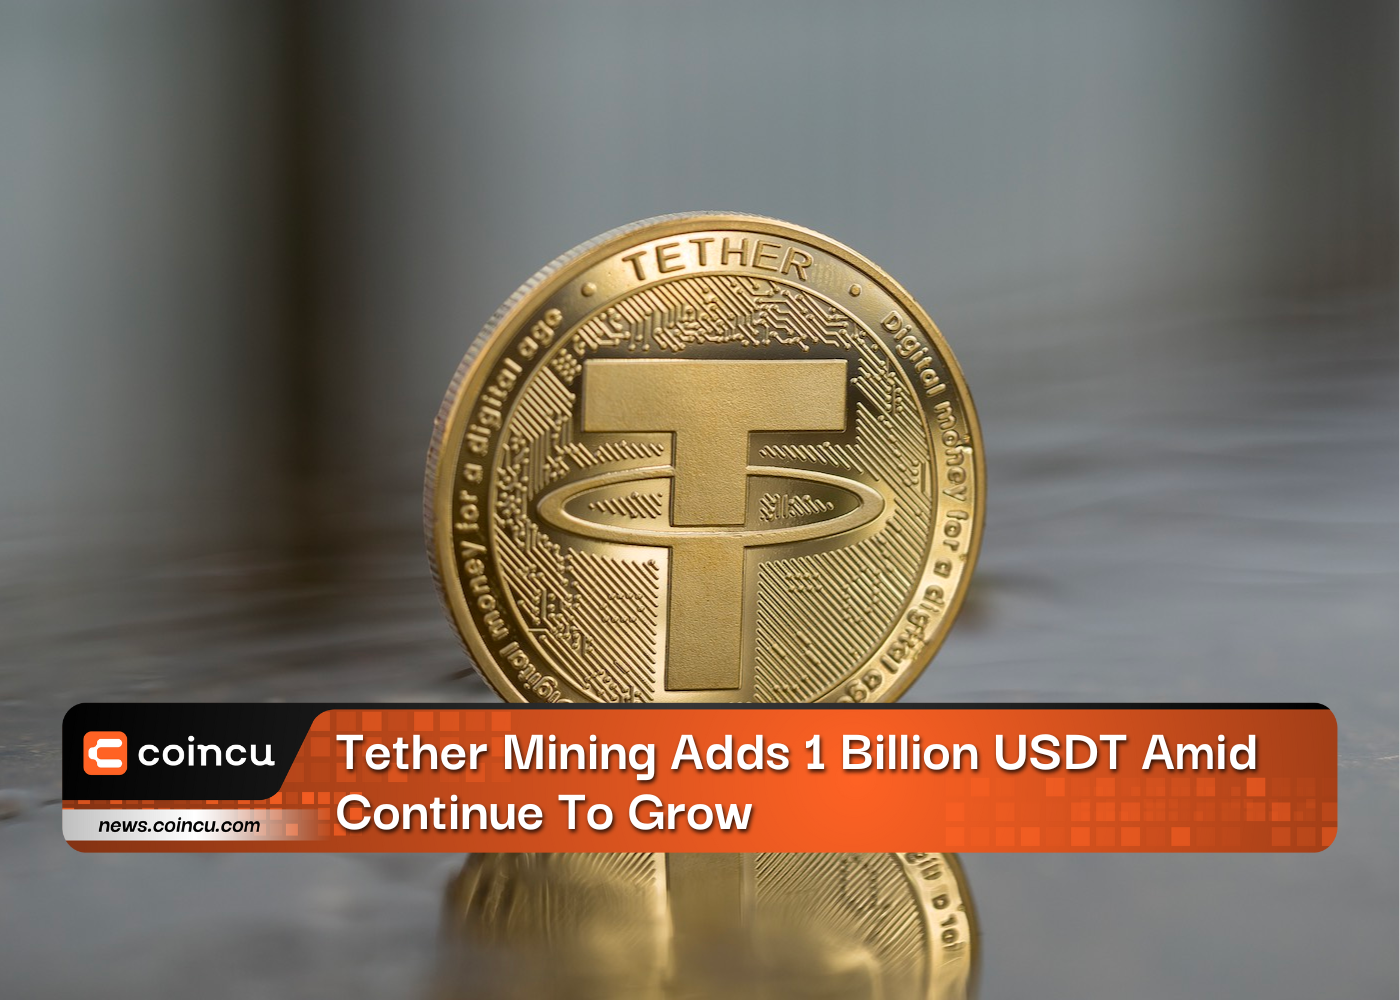 Tether Mining Adds 1 Billion USDT Amid Continue To Grow